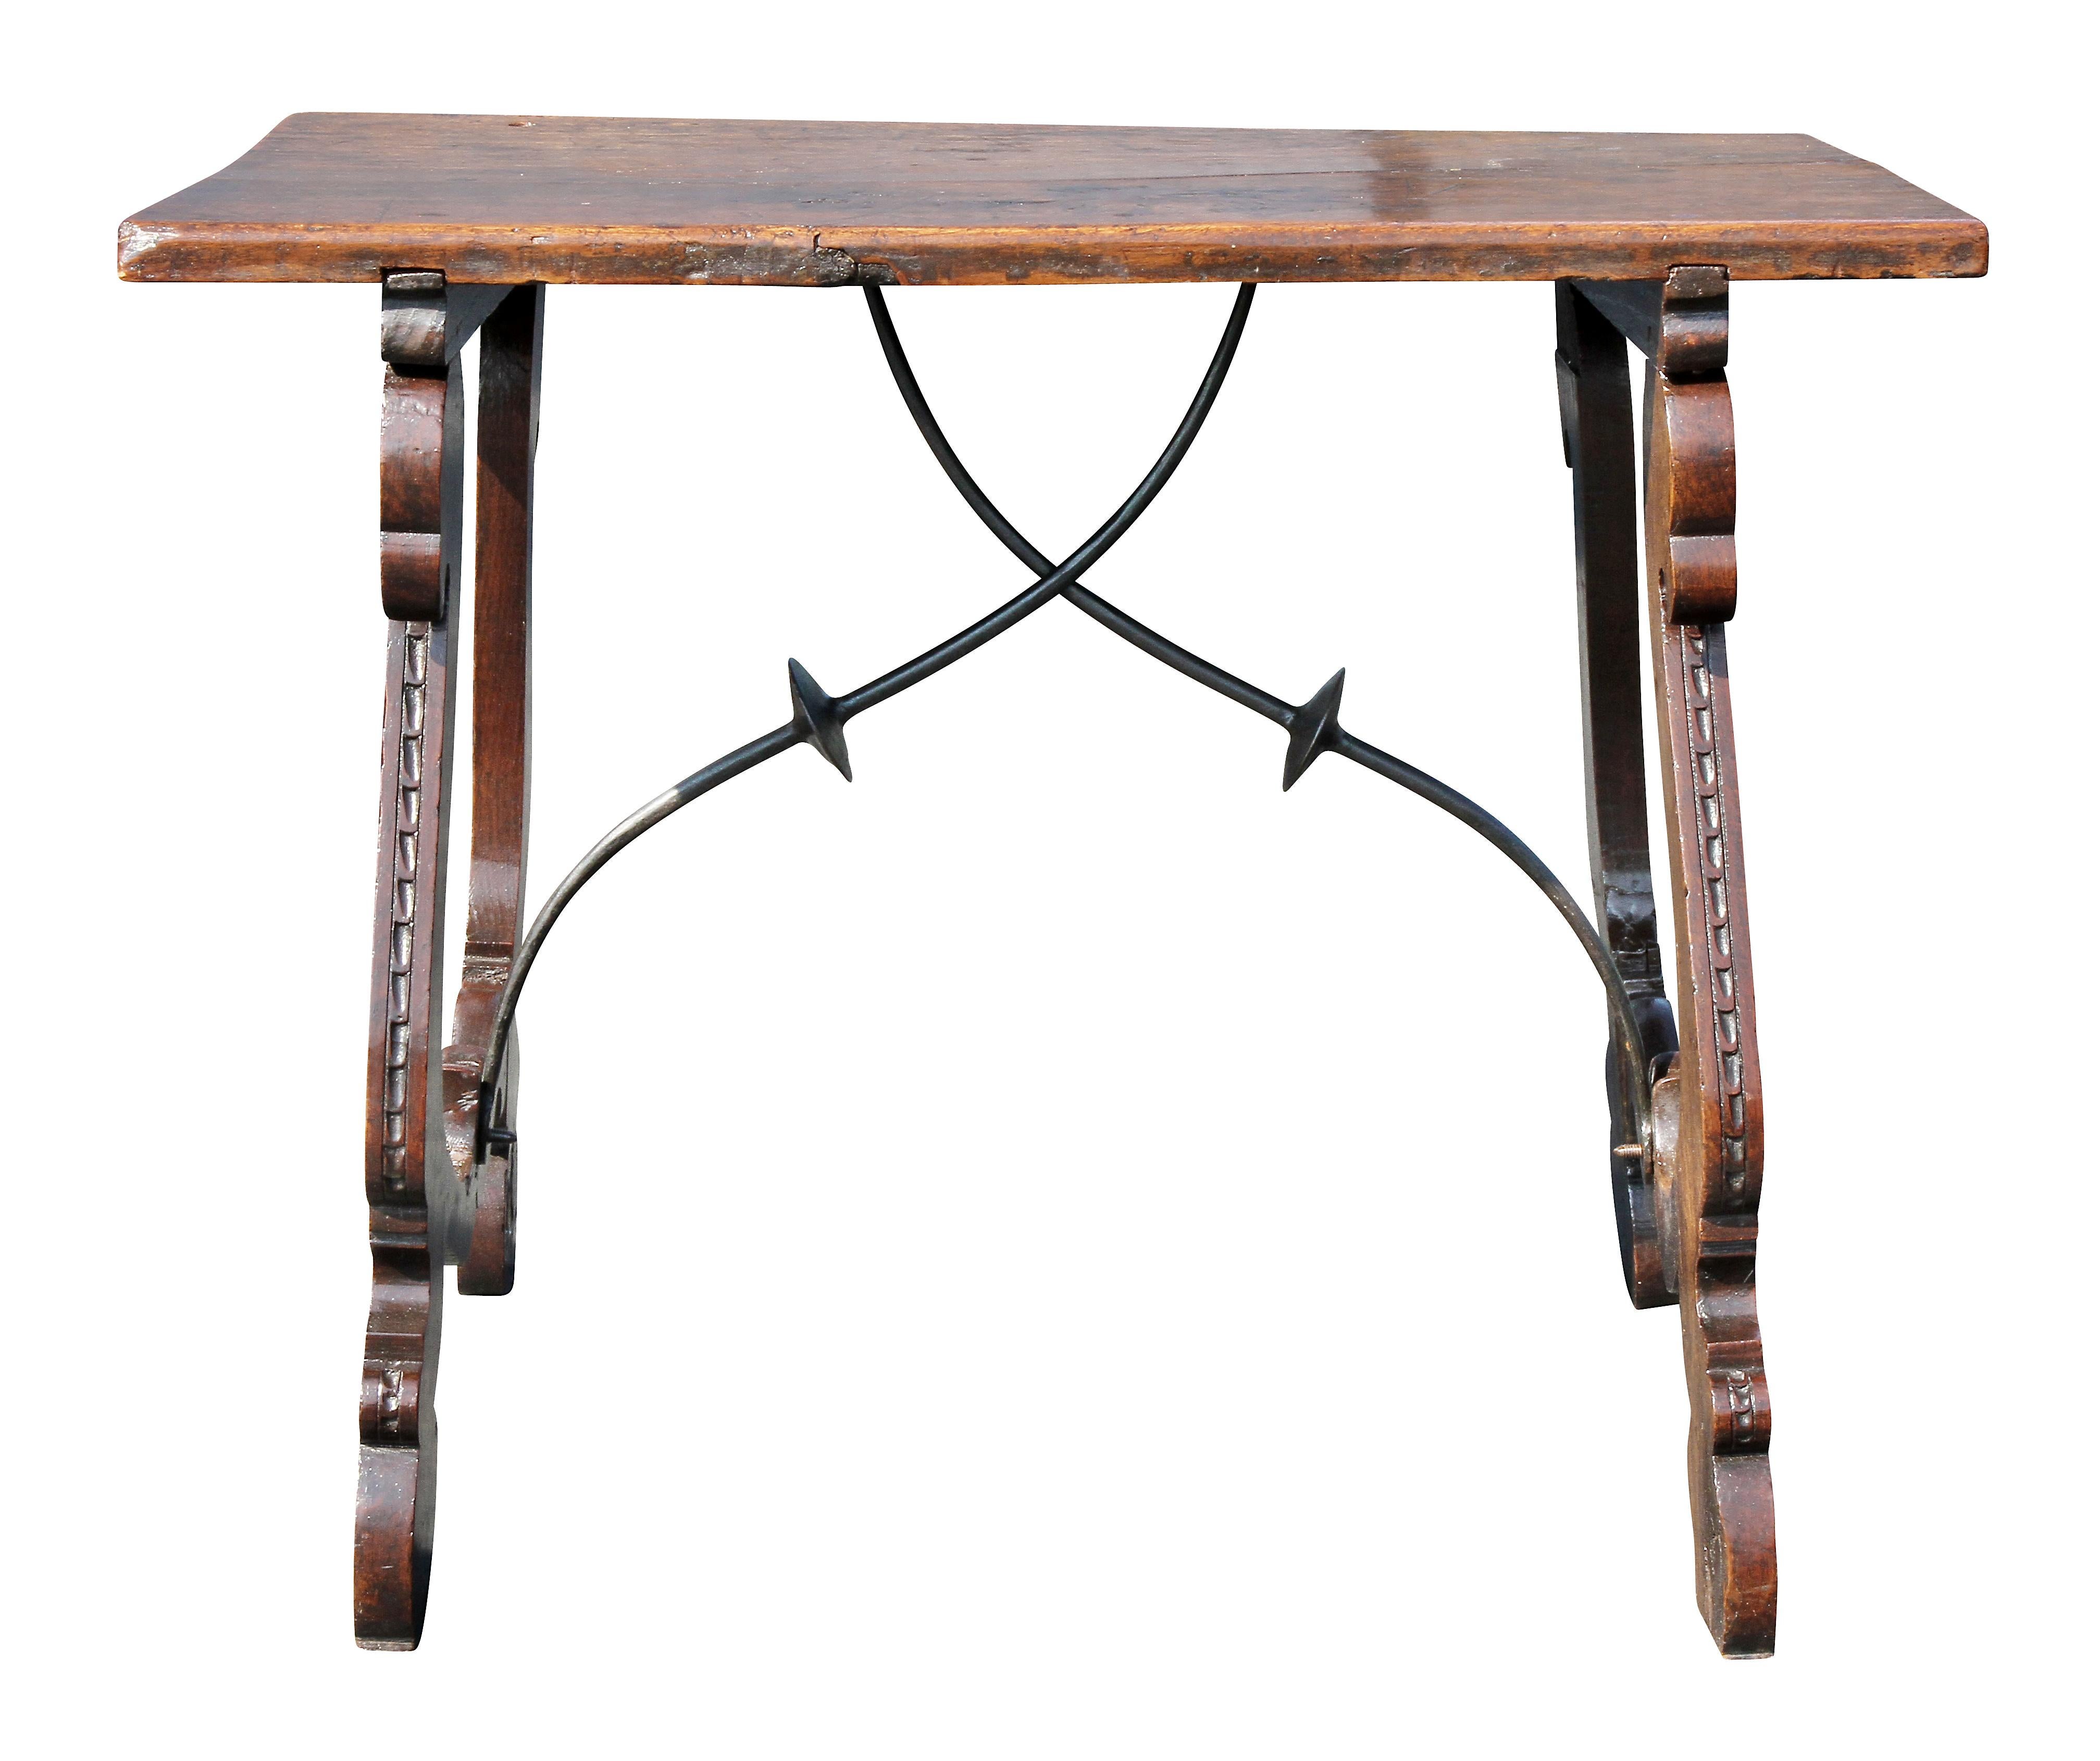 Rectangular top with old crack over a trestle base with wrought iron stretchers. Old elements.